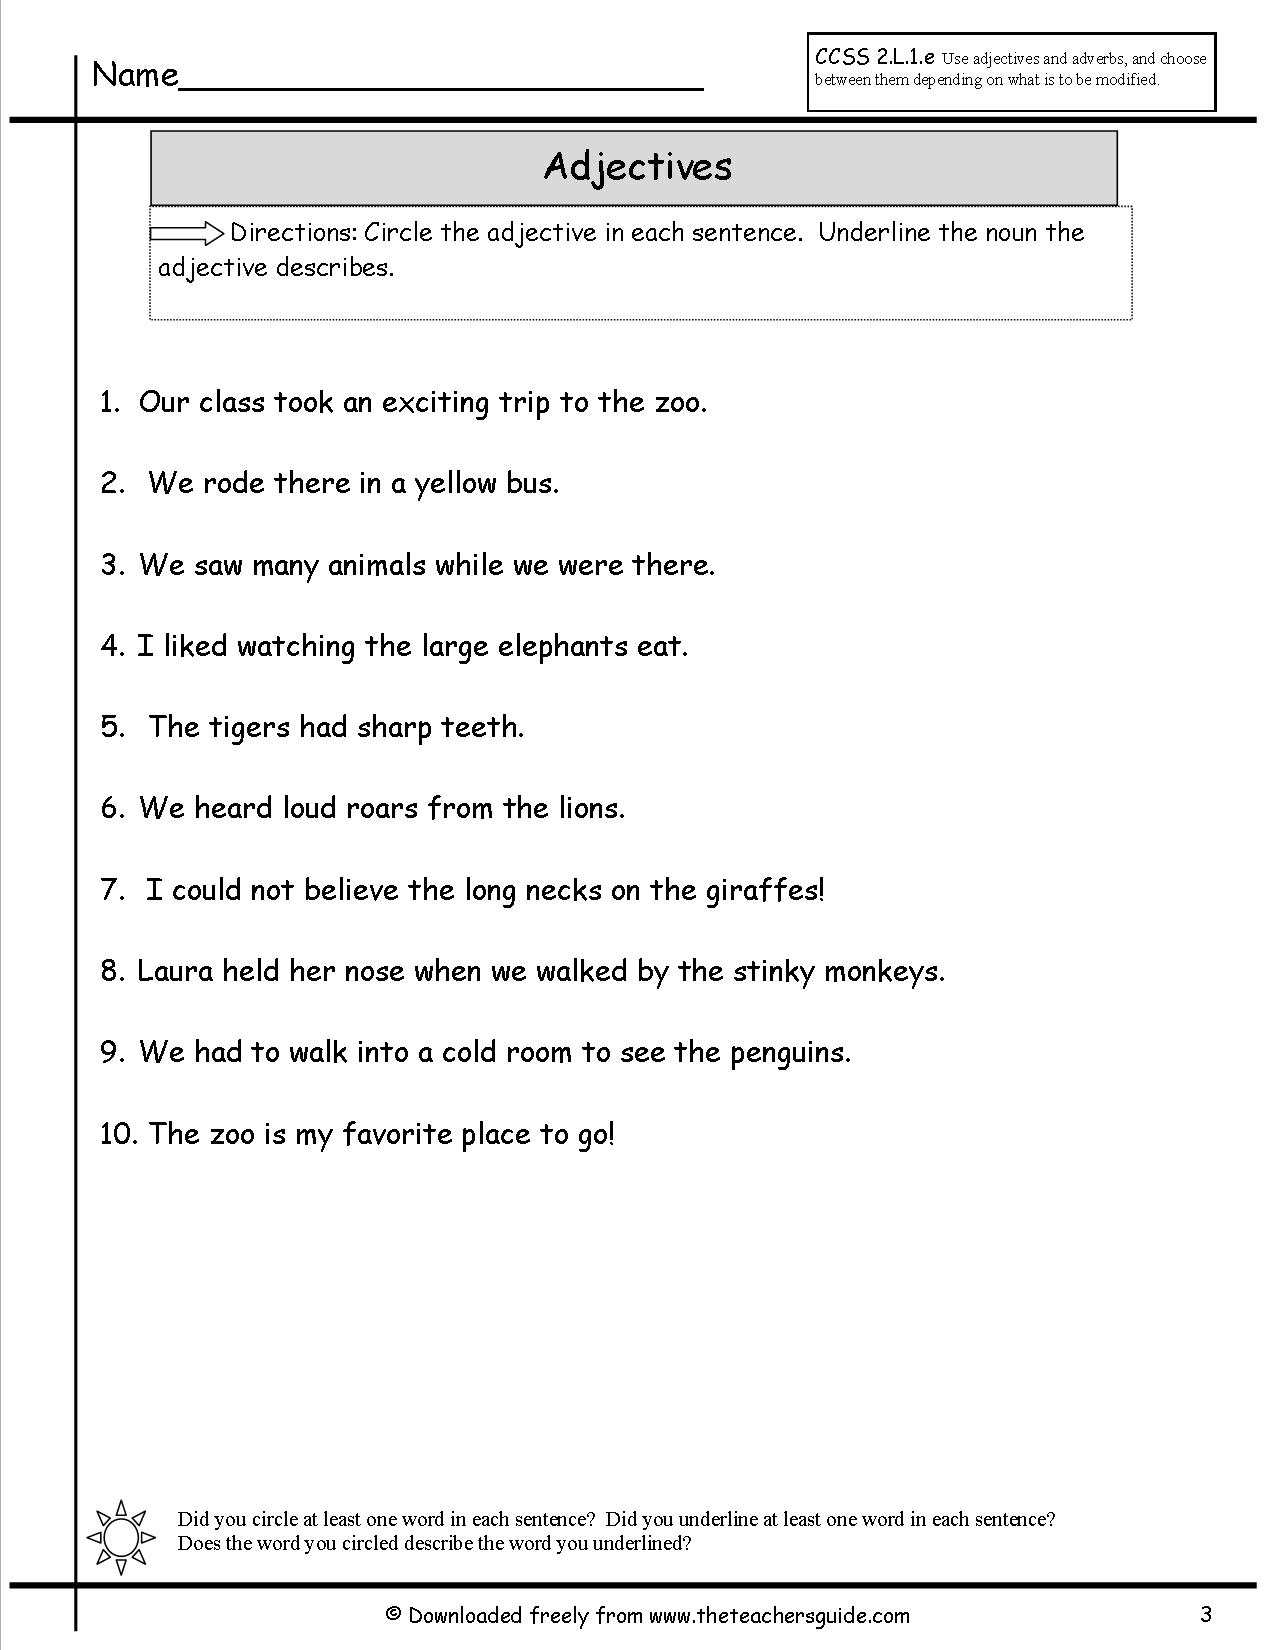 Word building adjectives Worksheets. Graded adjectives